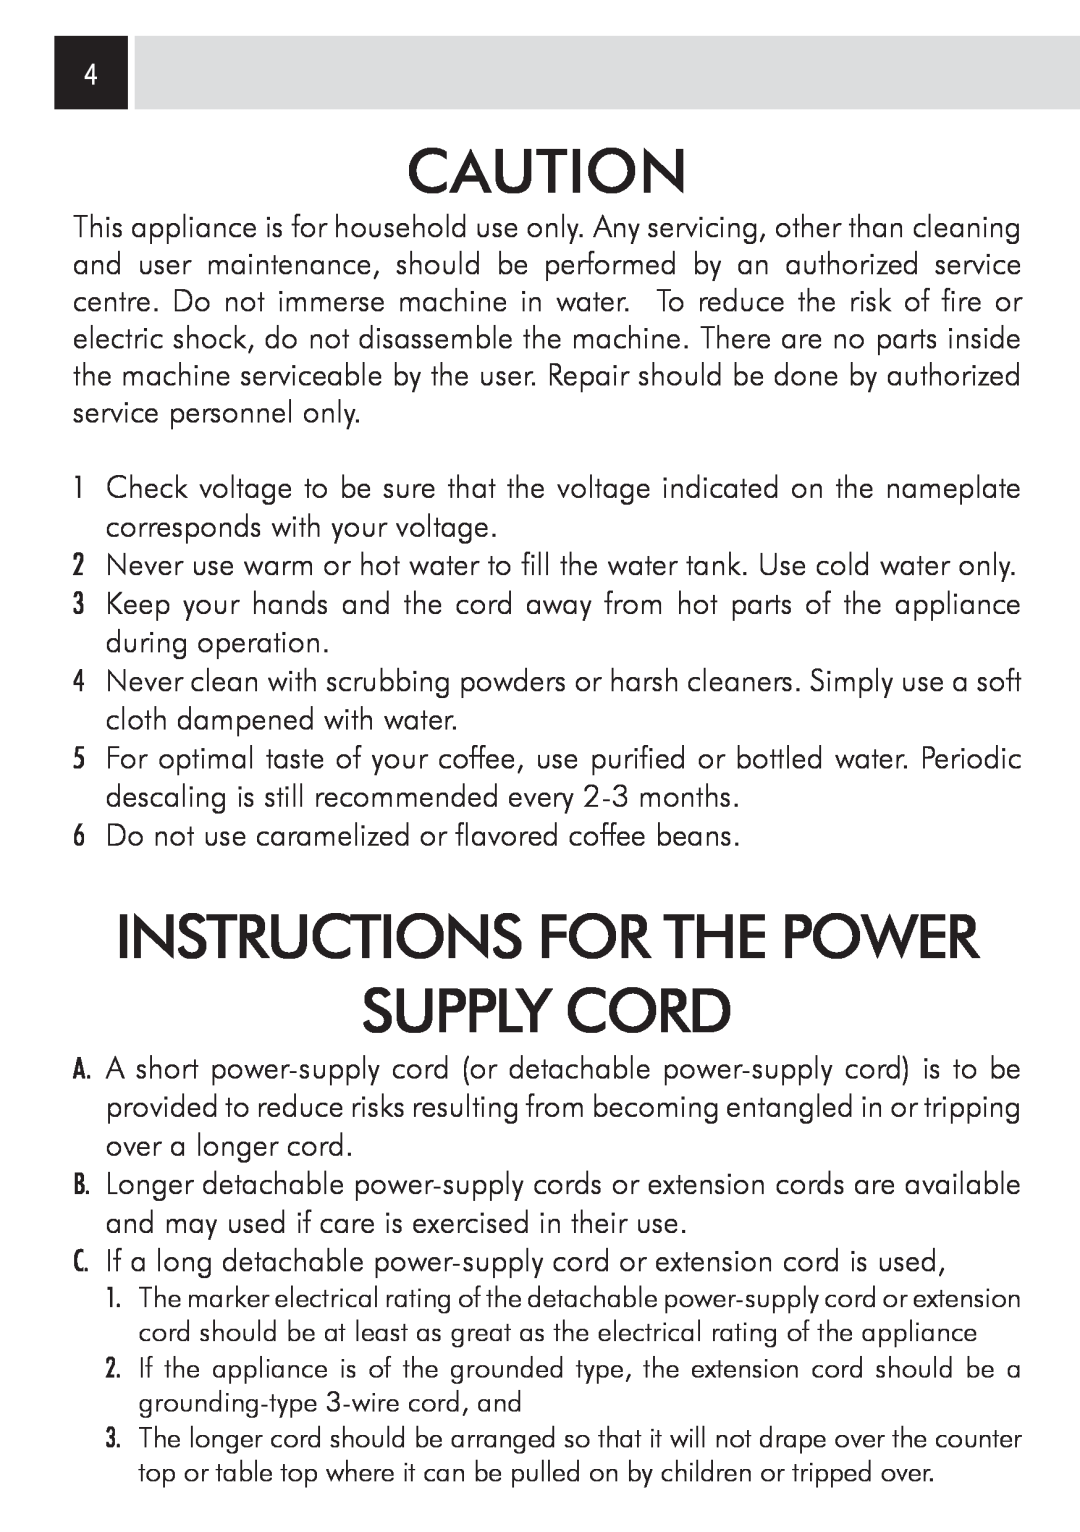 Saeco Coffee Makers SUP0310 manual Supply Cord, Instructions For The Power 